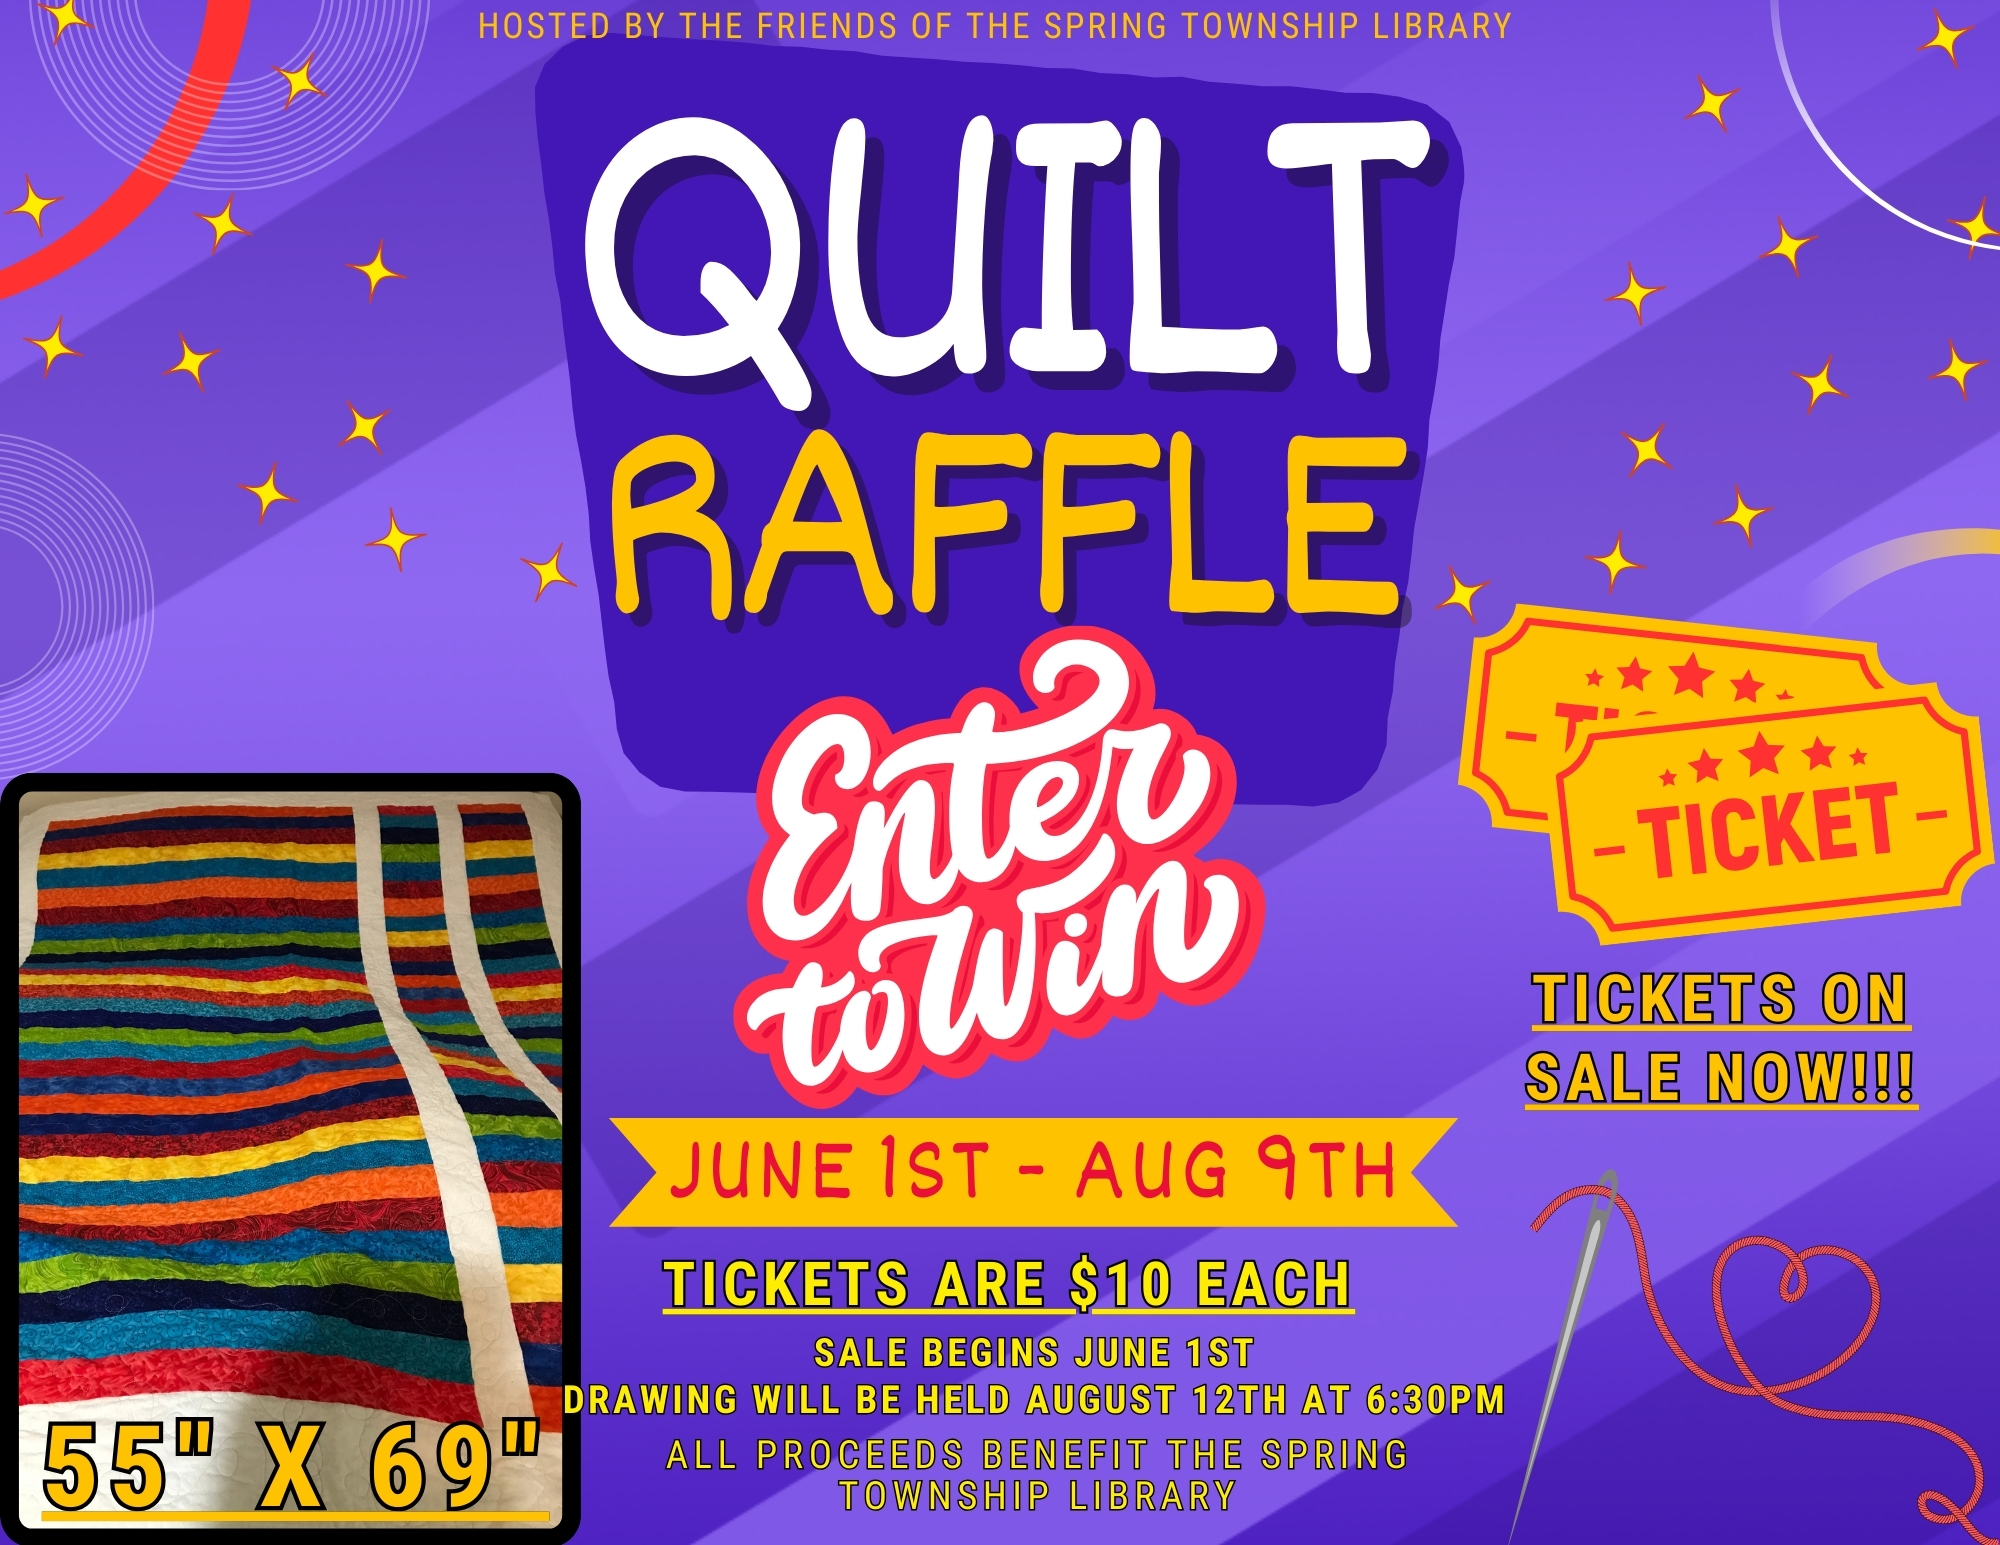 June 1st - Aug 9th  Tickets are $10 Each - ON SALE NOW!  The Drawing will be held Aug 12th at 6:30PM  All proceeds benefit the Spring Township Library  The quilt measures 55"x69"  The quilt was made and donated by Libby McGuire, a member of the Friends of The Spring Township Library.